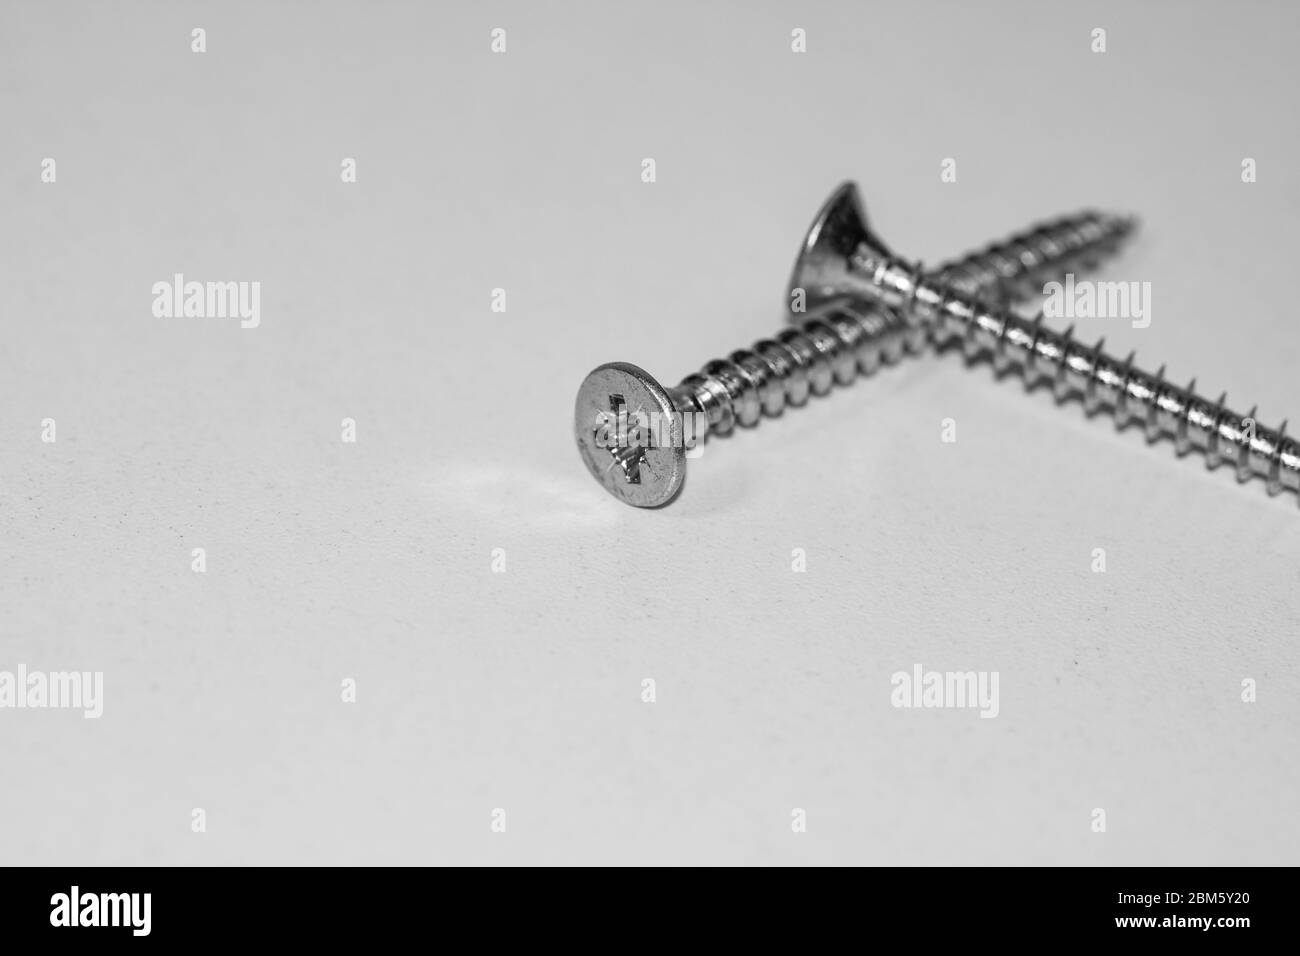 Close up photo of screws, set of screws in a construction abstraction. Industrial background with screws on a white board Stock Photo